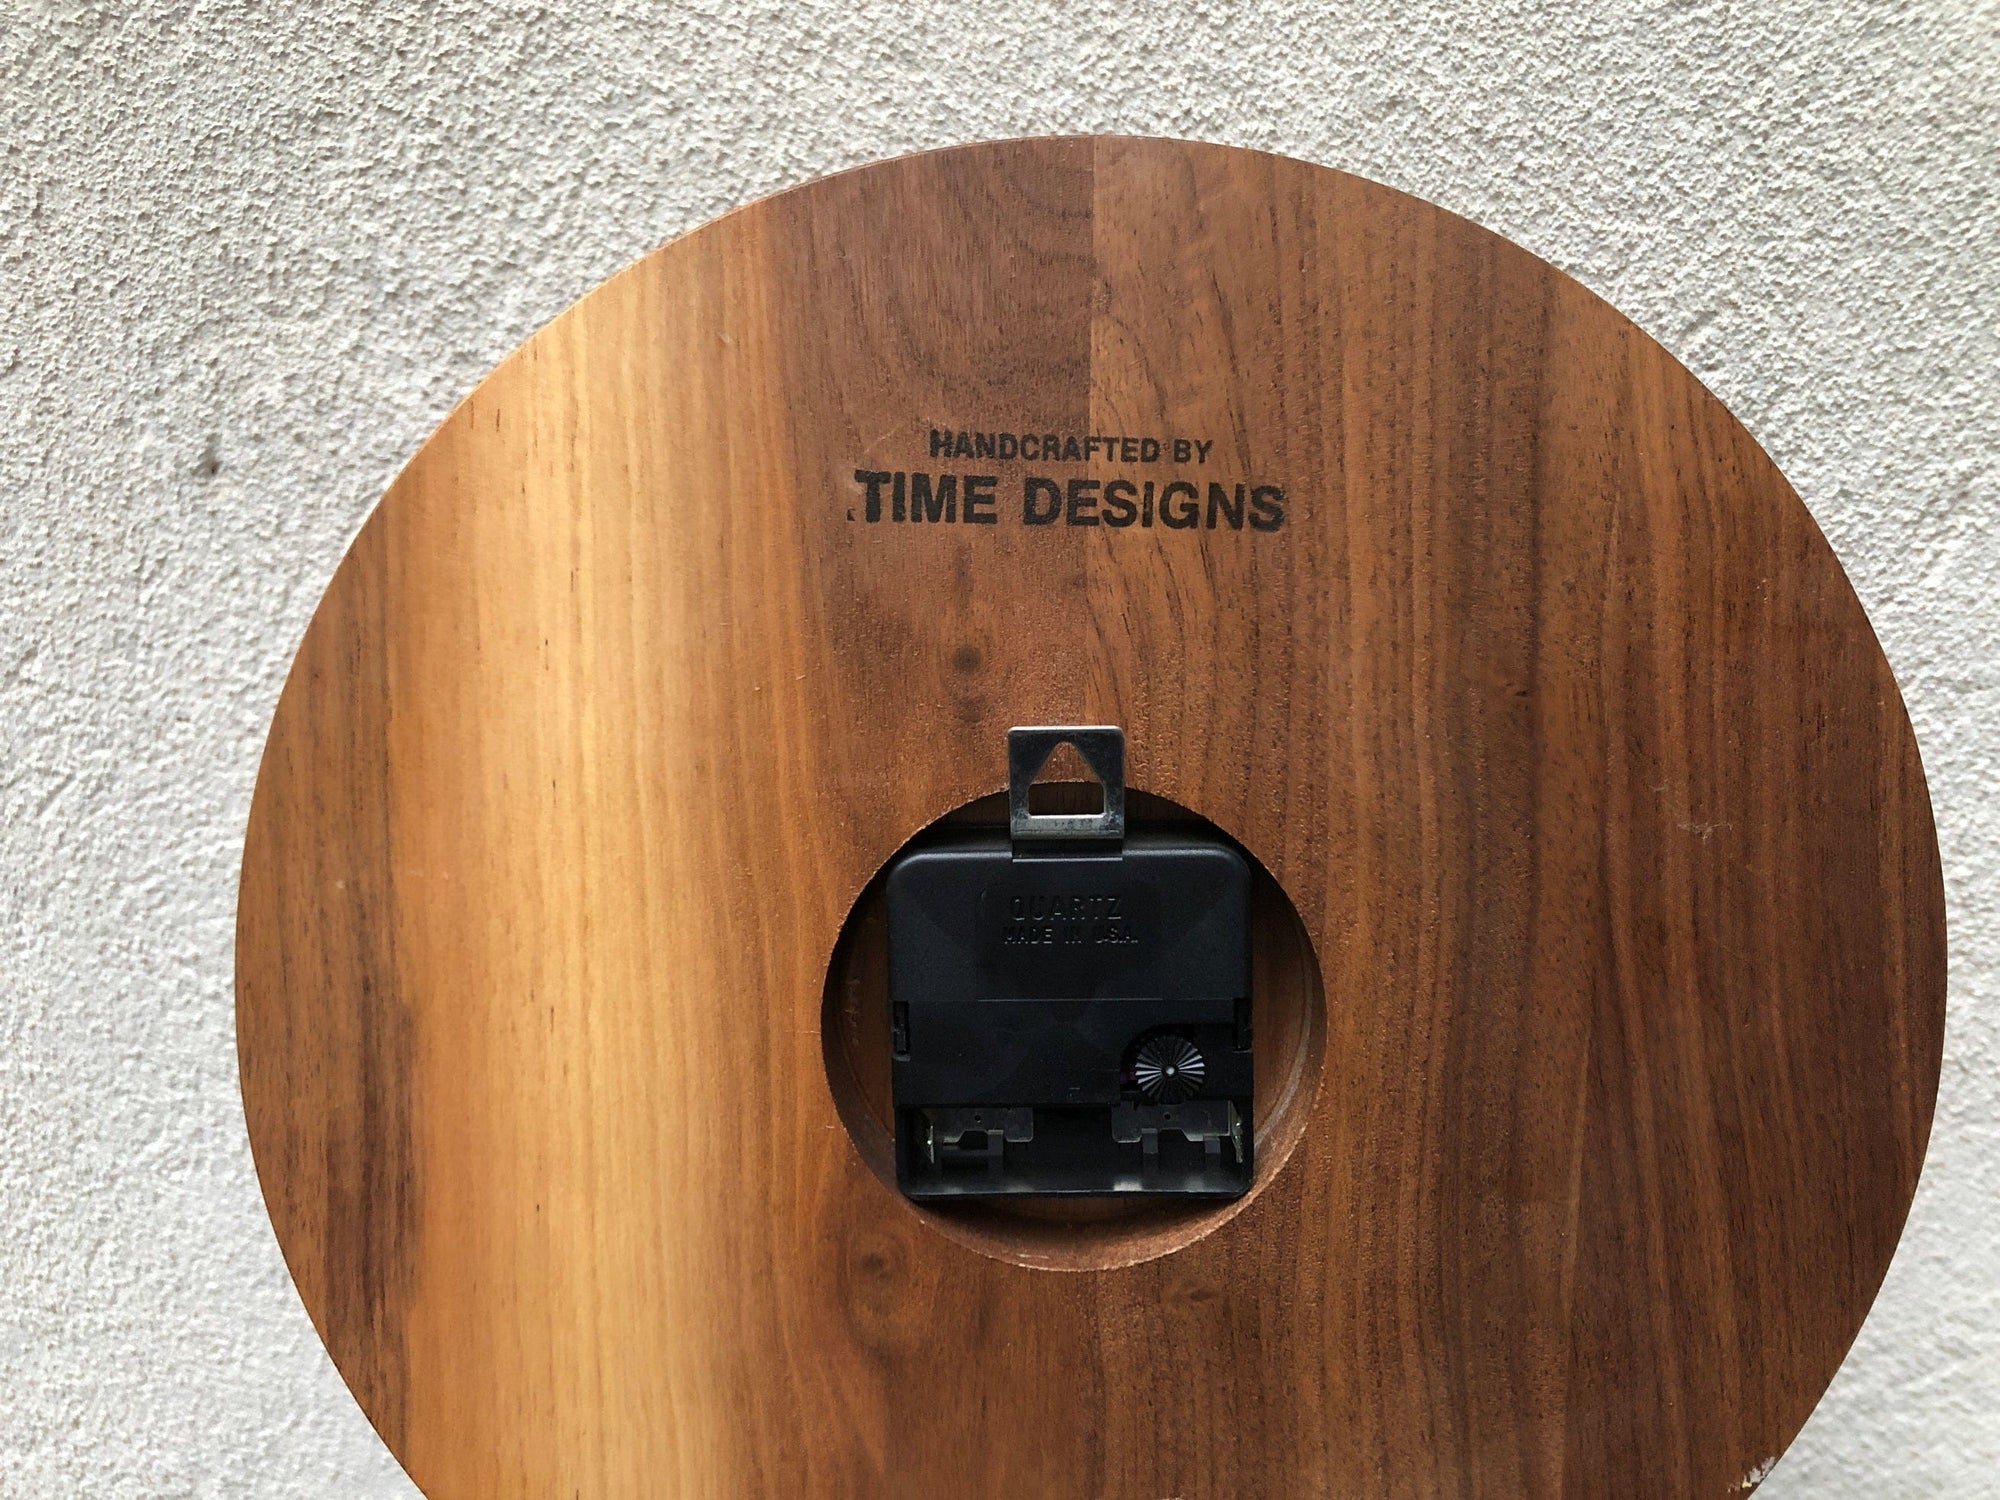 I Like Mike's Mid Century Modern Clock Modern Handcrafted Round Solid Wood Wall Clock, Inlayed Brass Markers, Quiet Quartz Movement